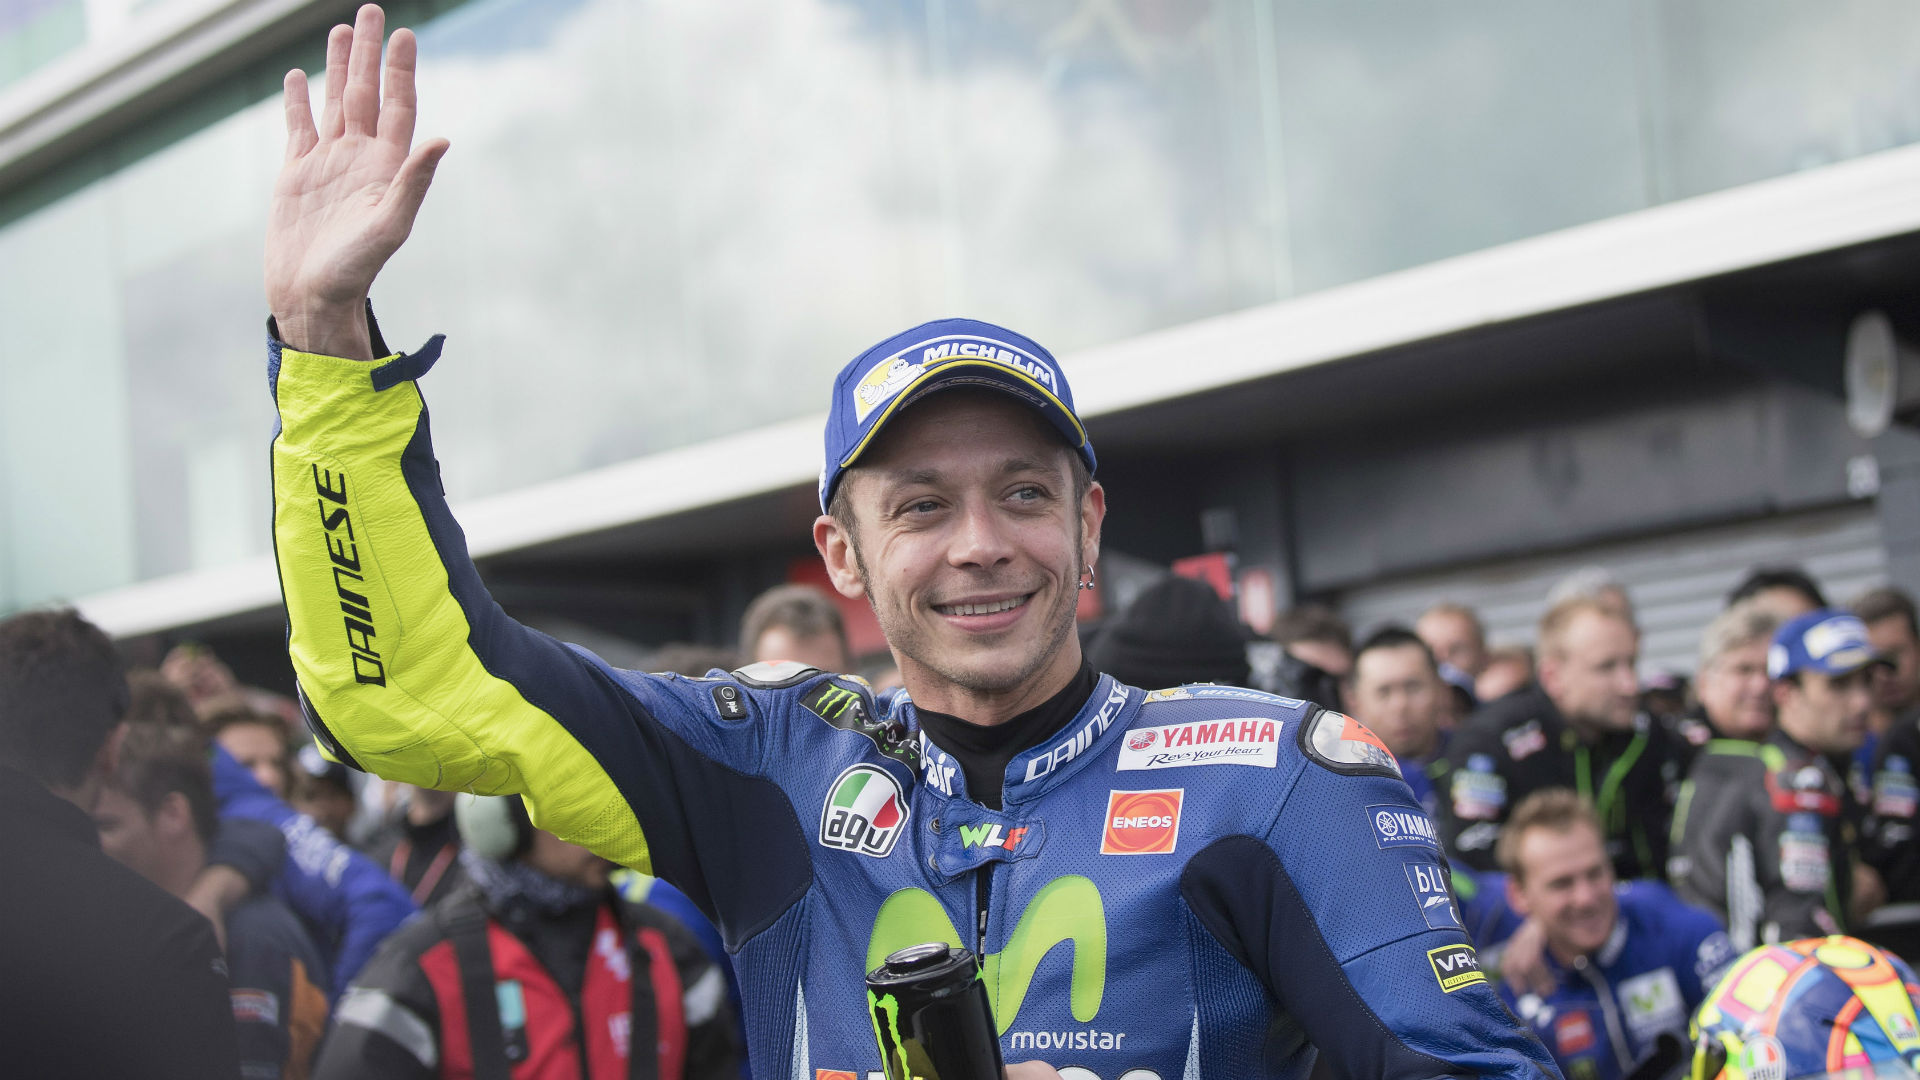 Movistar Yamaha's association with Valentino Rossi will extend into 2020 after the MotoGP icon signed fresh terms.